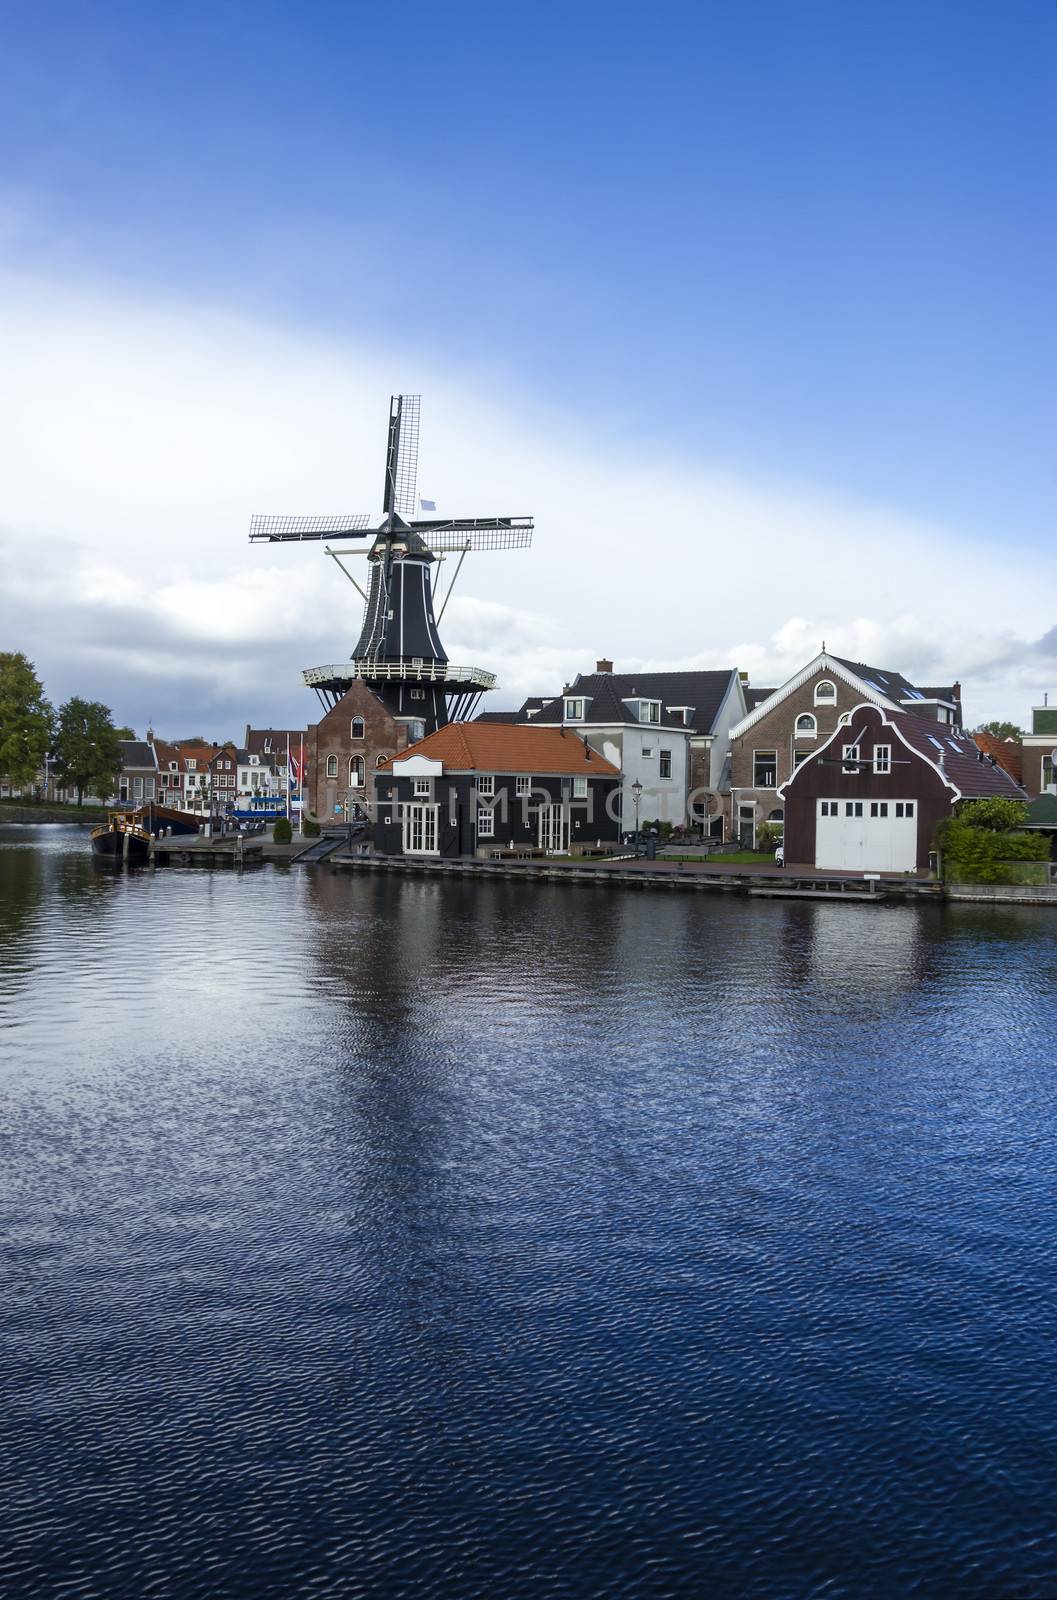 Picturesque landscape with windmill. Haarlem, Holland by Tetyana